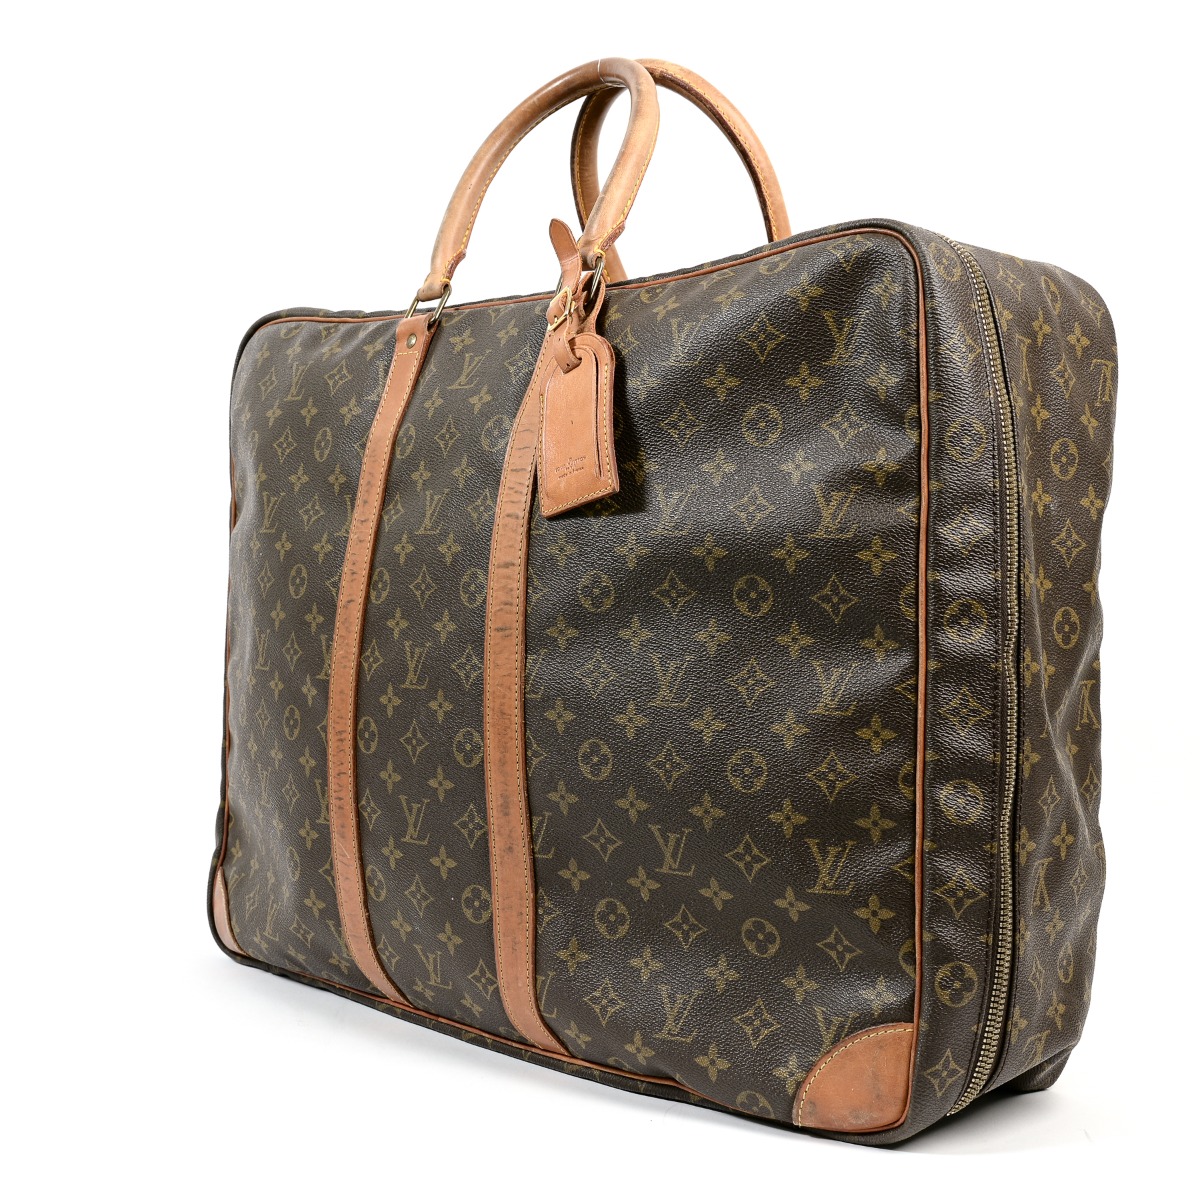 Louis Vuitton Reference numberM40044 luxury vintage bags for sale